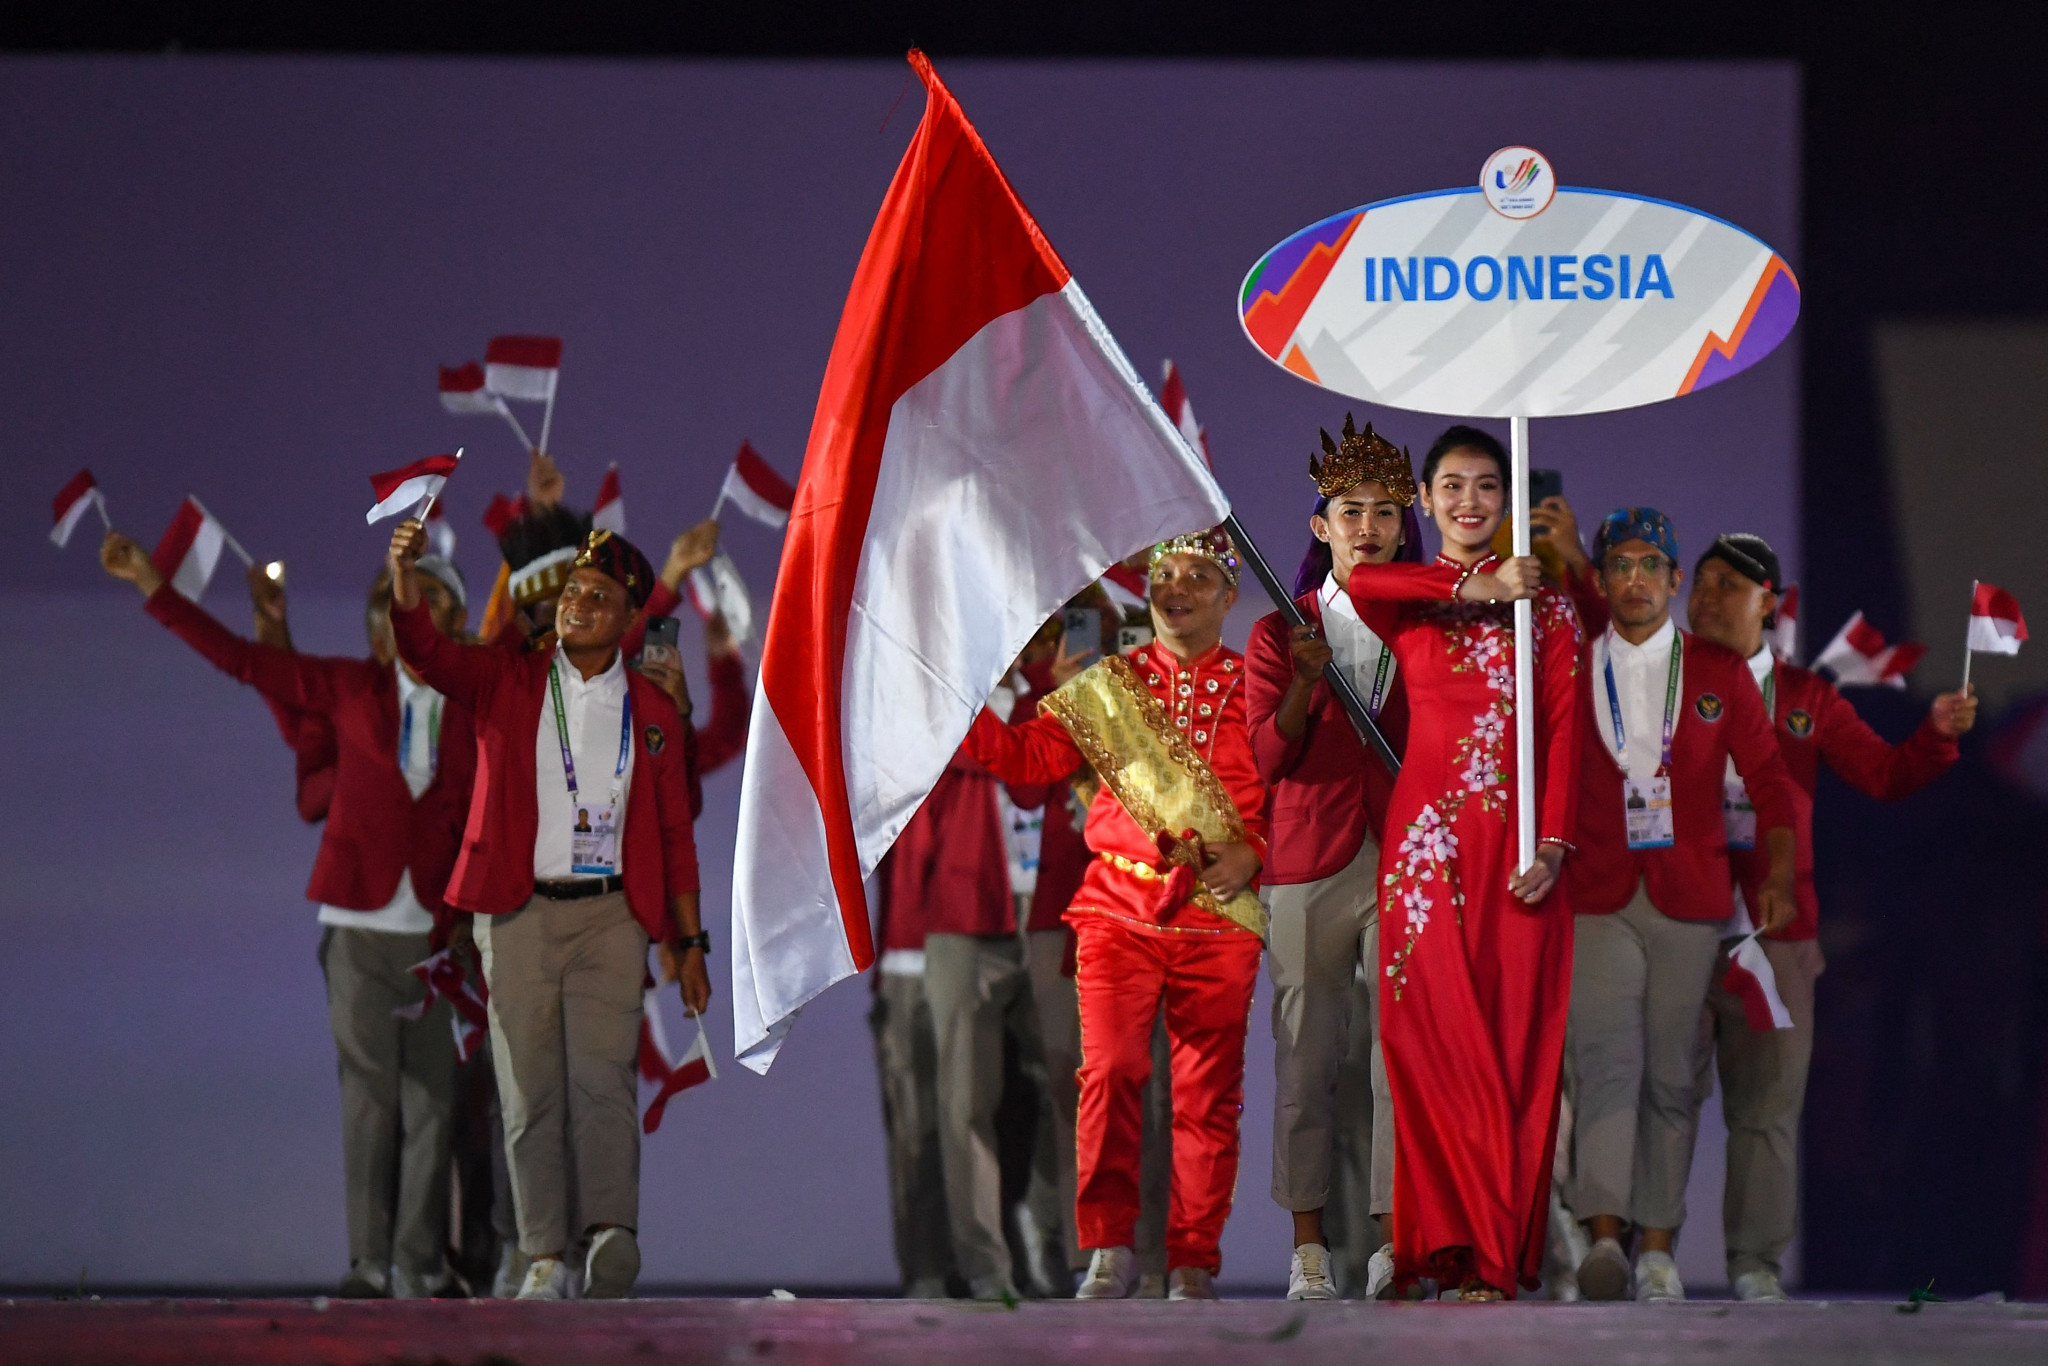 Indonesia wants to host the 2036 Olympic Games ©Getty Images